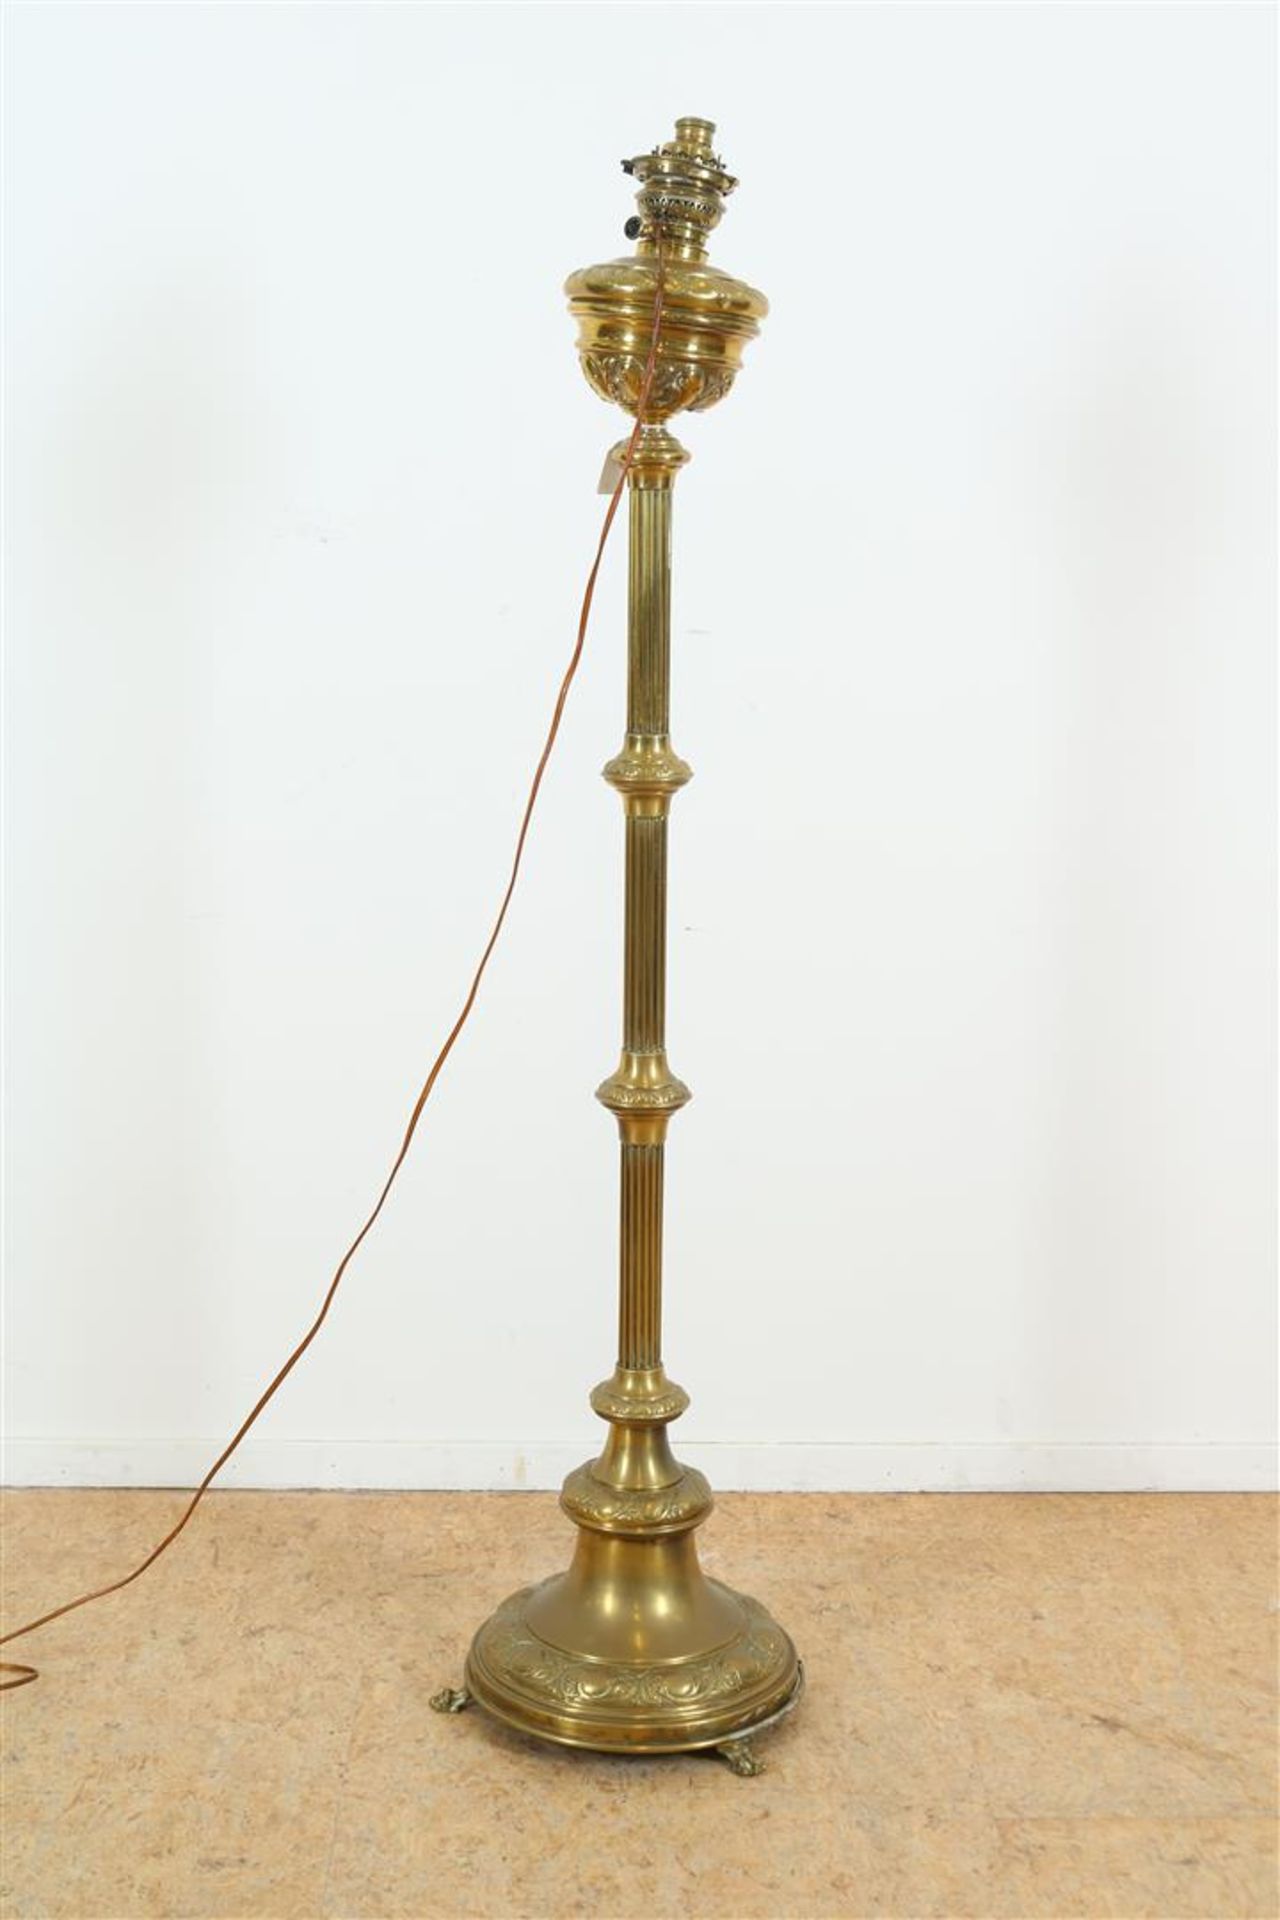 Brass oil lamp converted into a table lamp, circa 1930, 60-80.